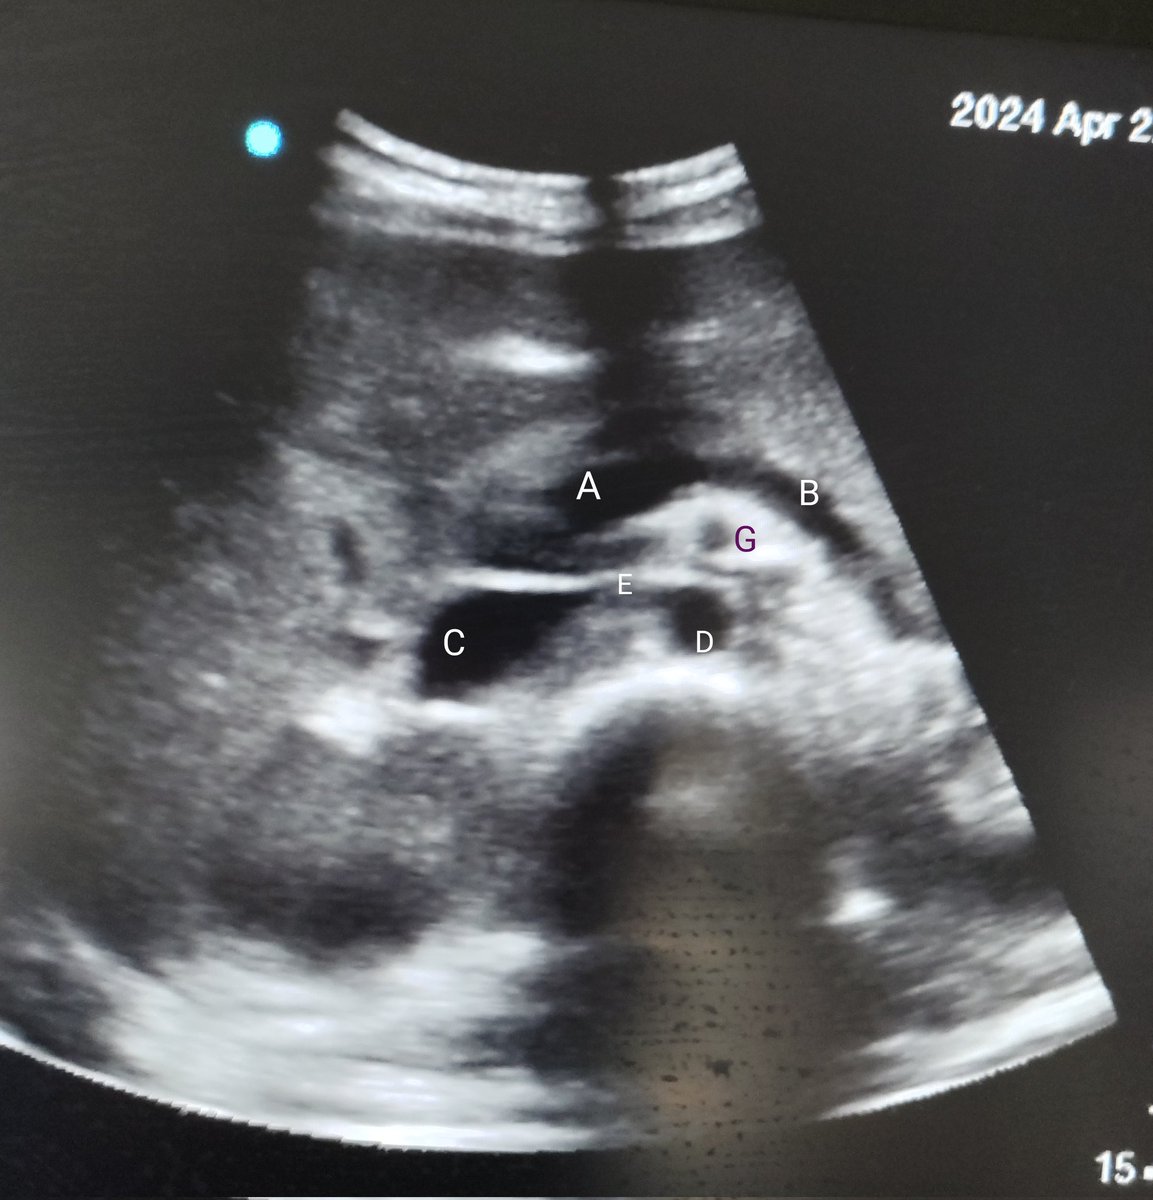 Abdominal ultrasound🫄
What are the labelled structures?
#MedTwitter
#MedX
#FOAMED
#POCUS
#GITWITTER